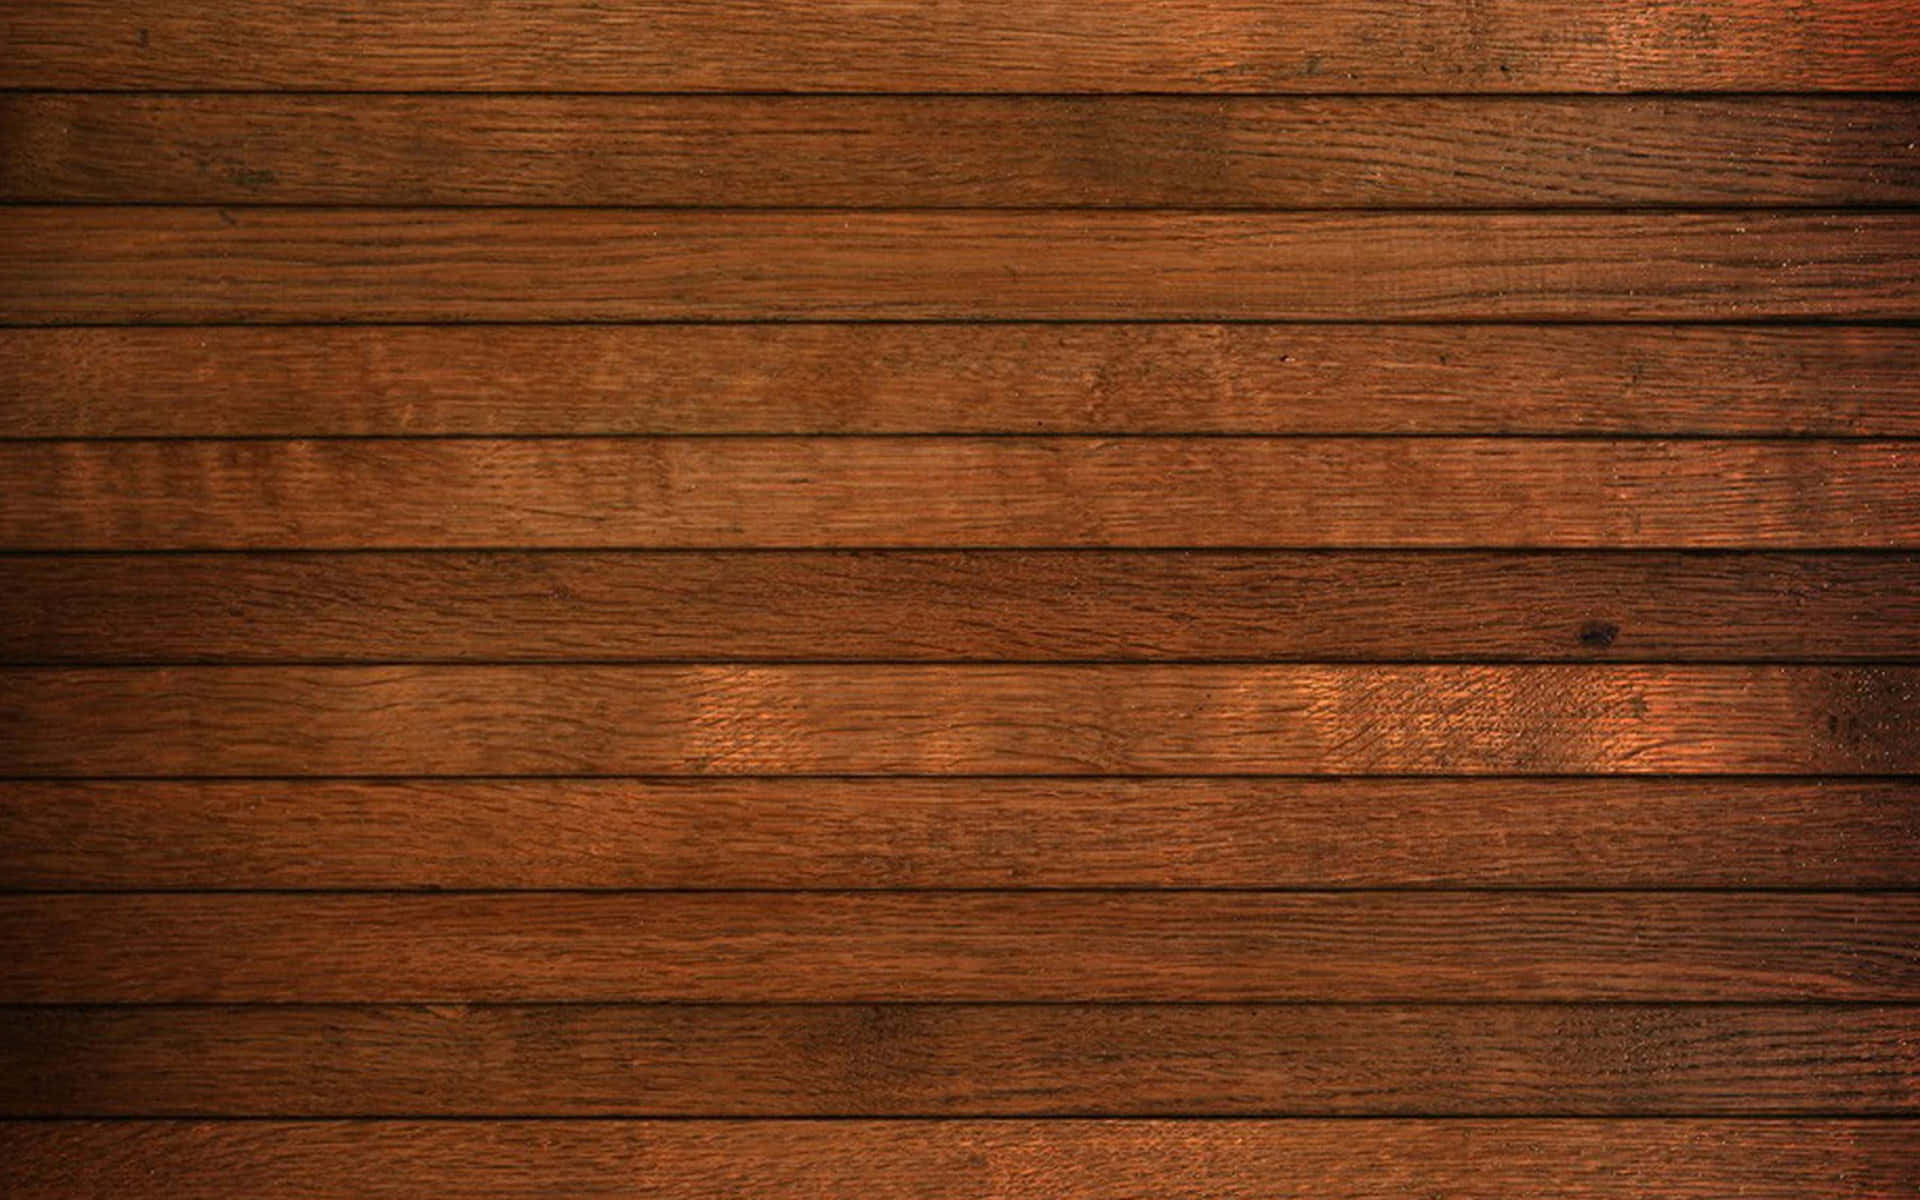 A Wooden Background With Brown Stripes